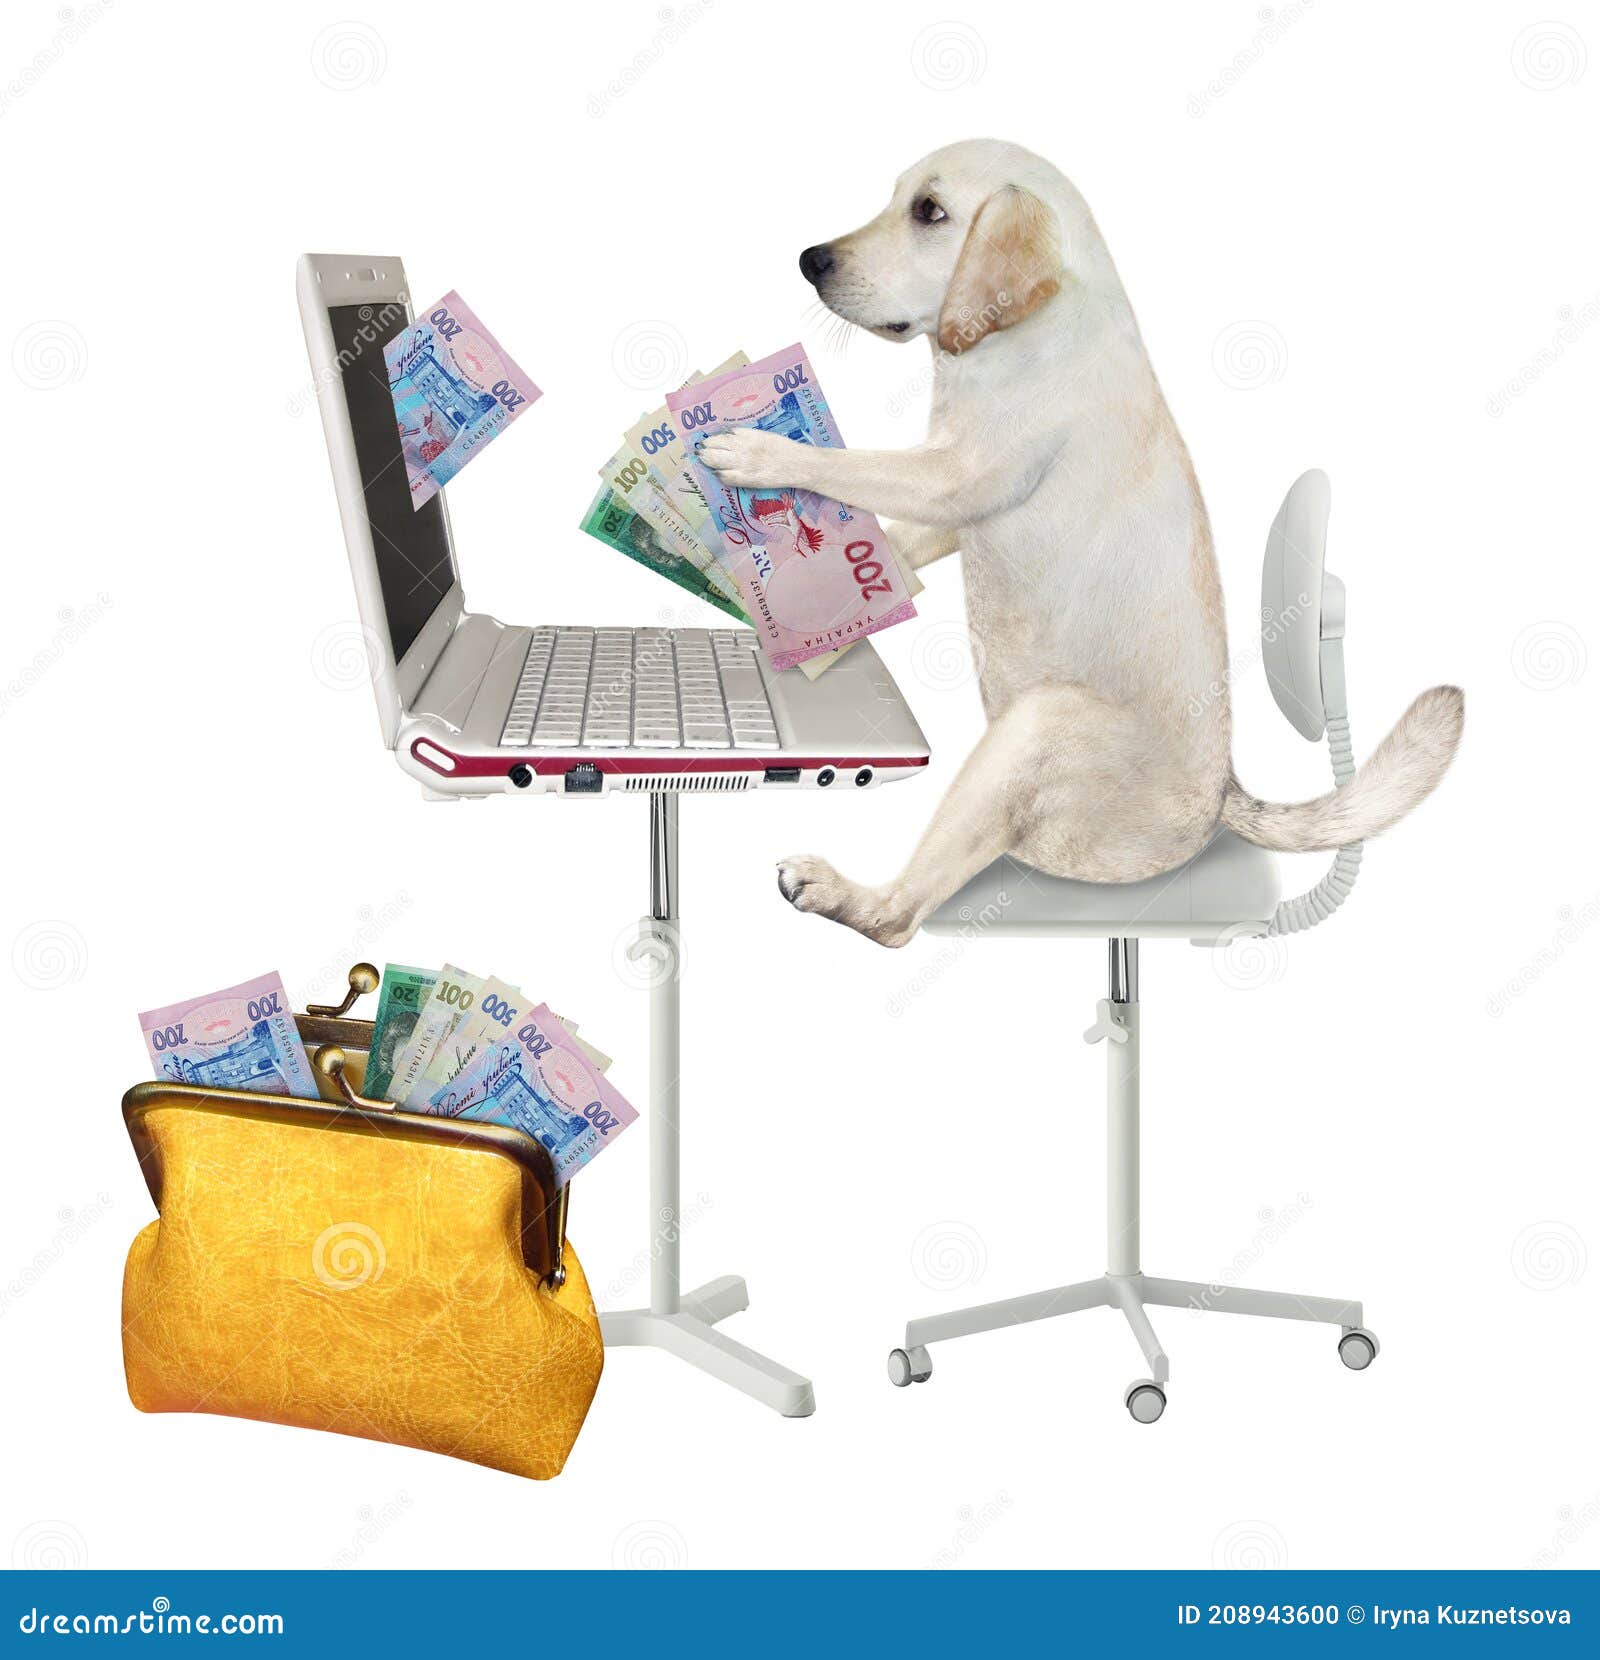 dog earns hryvnia from laptop 2